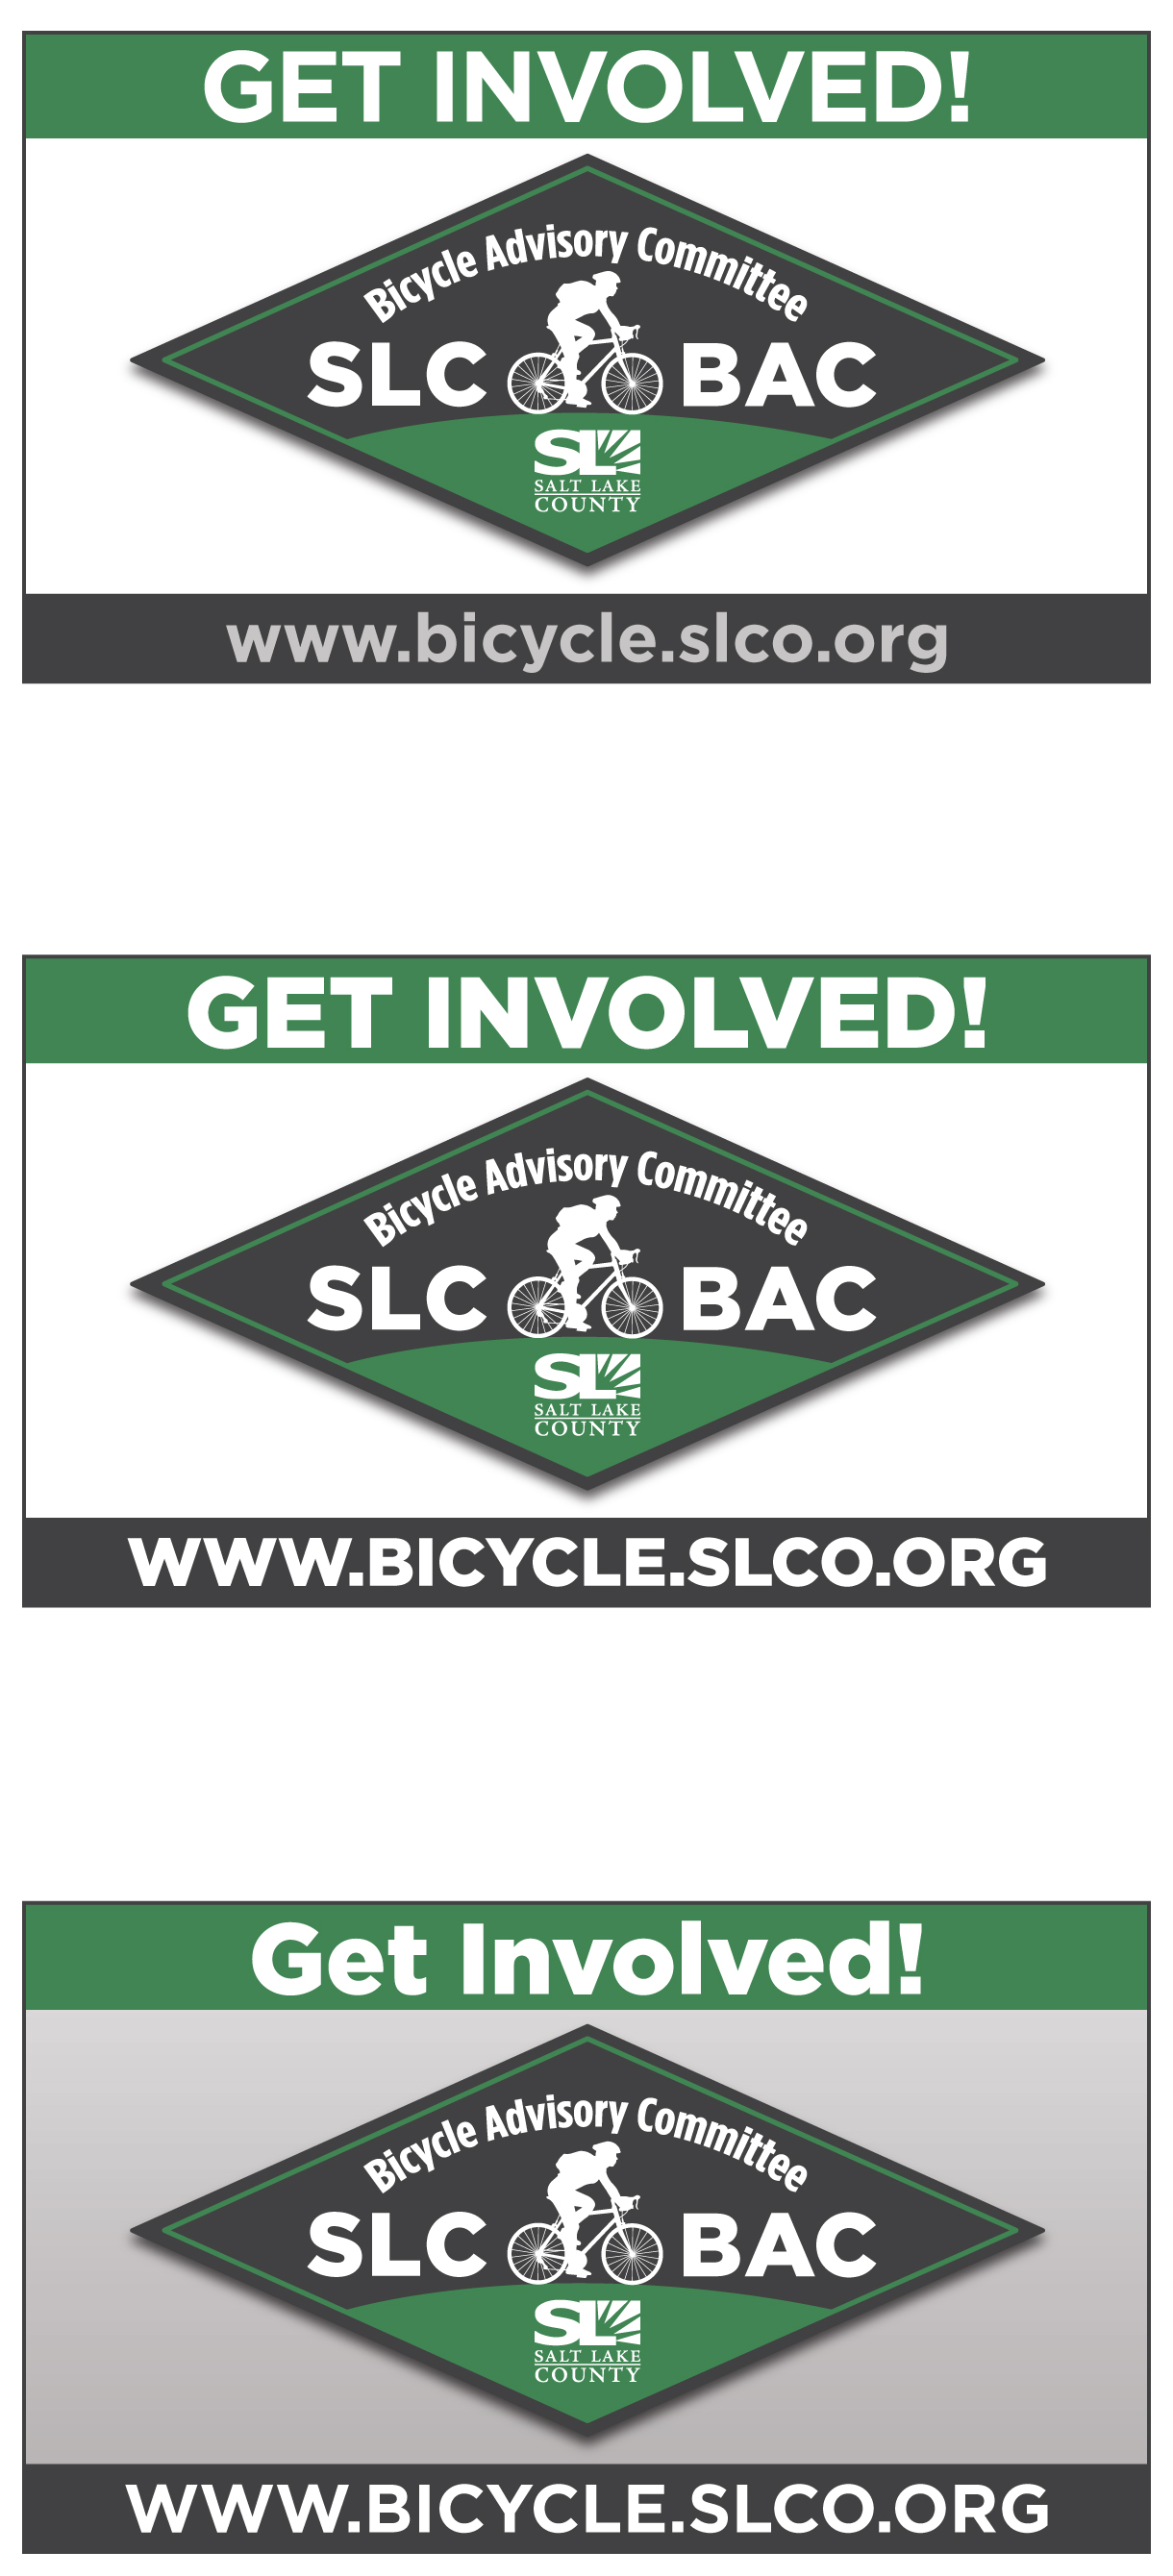 SLCBAC News for April 2017 – Committee Members Wanted